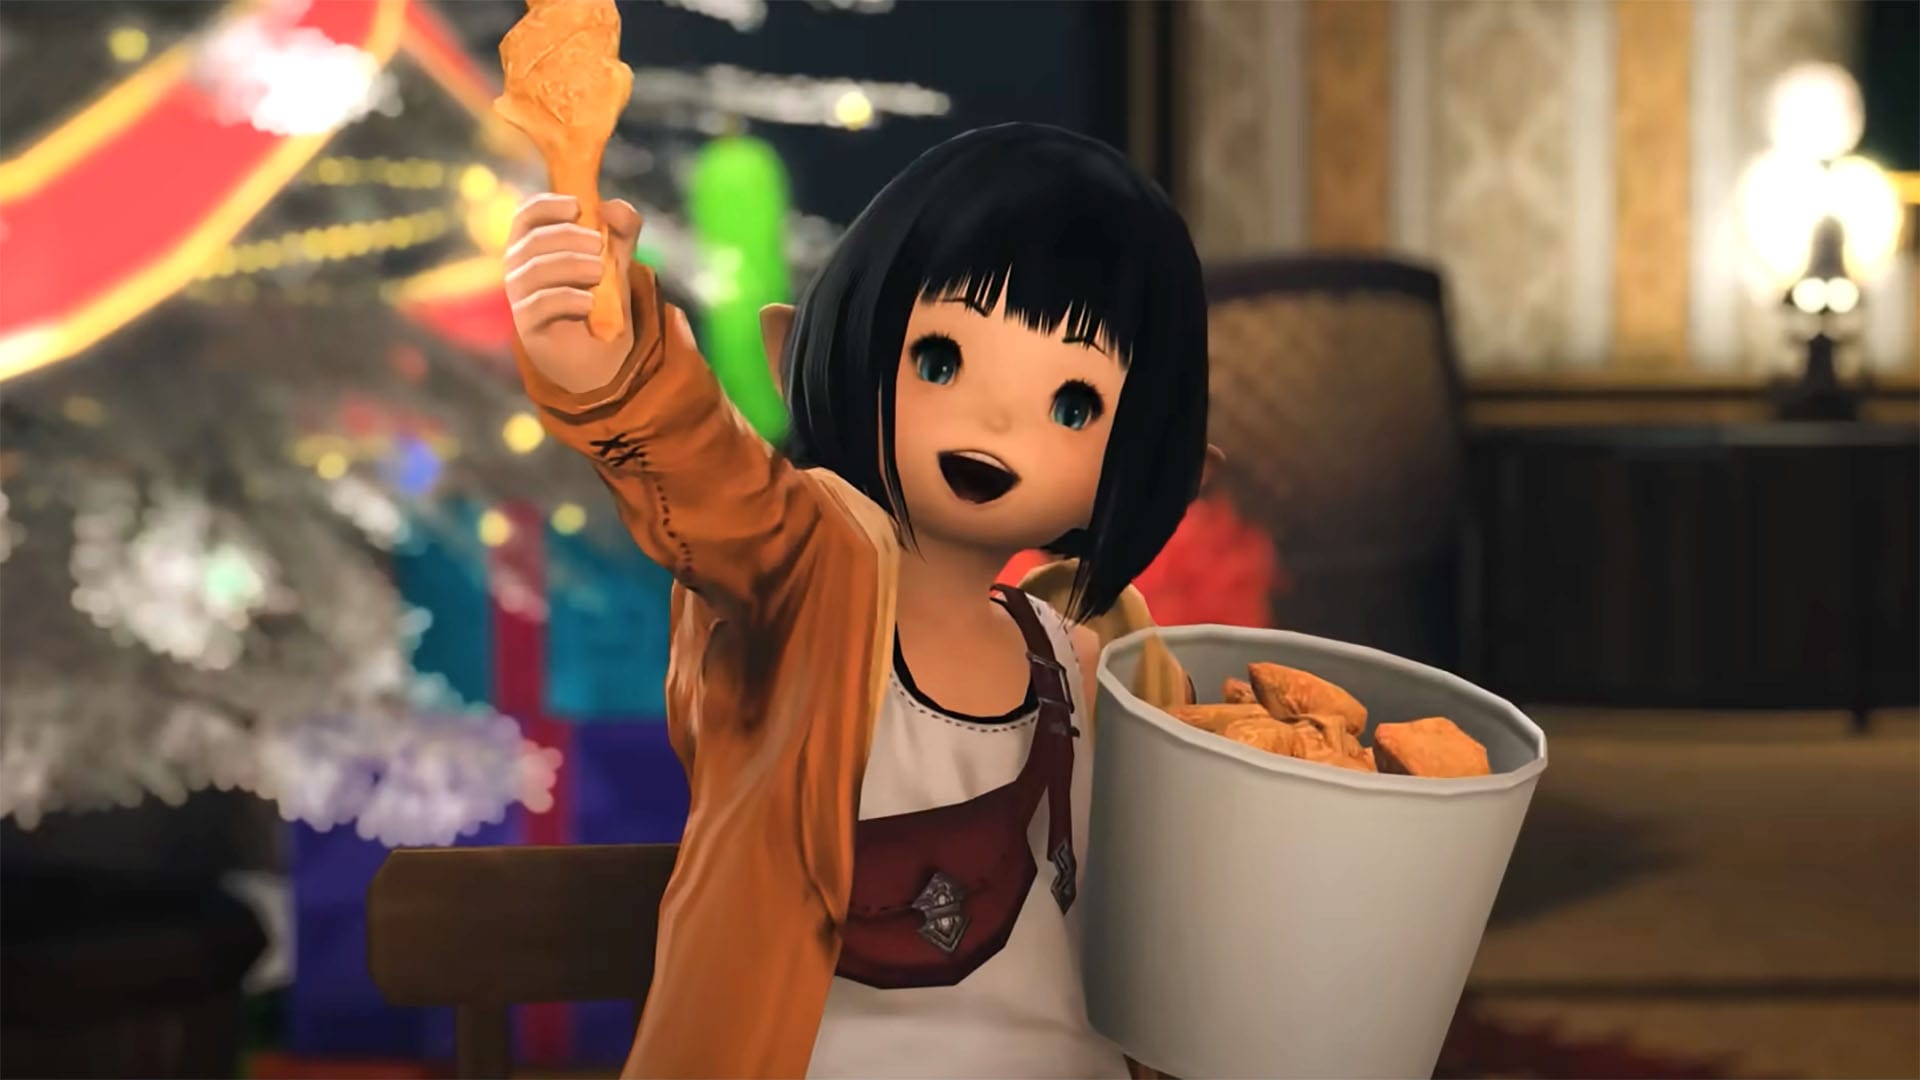 Celebrate Christmas With this Adorably Creepy Final Fantasy XIV Fan Movie